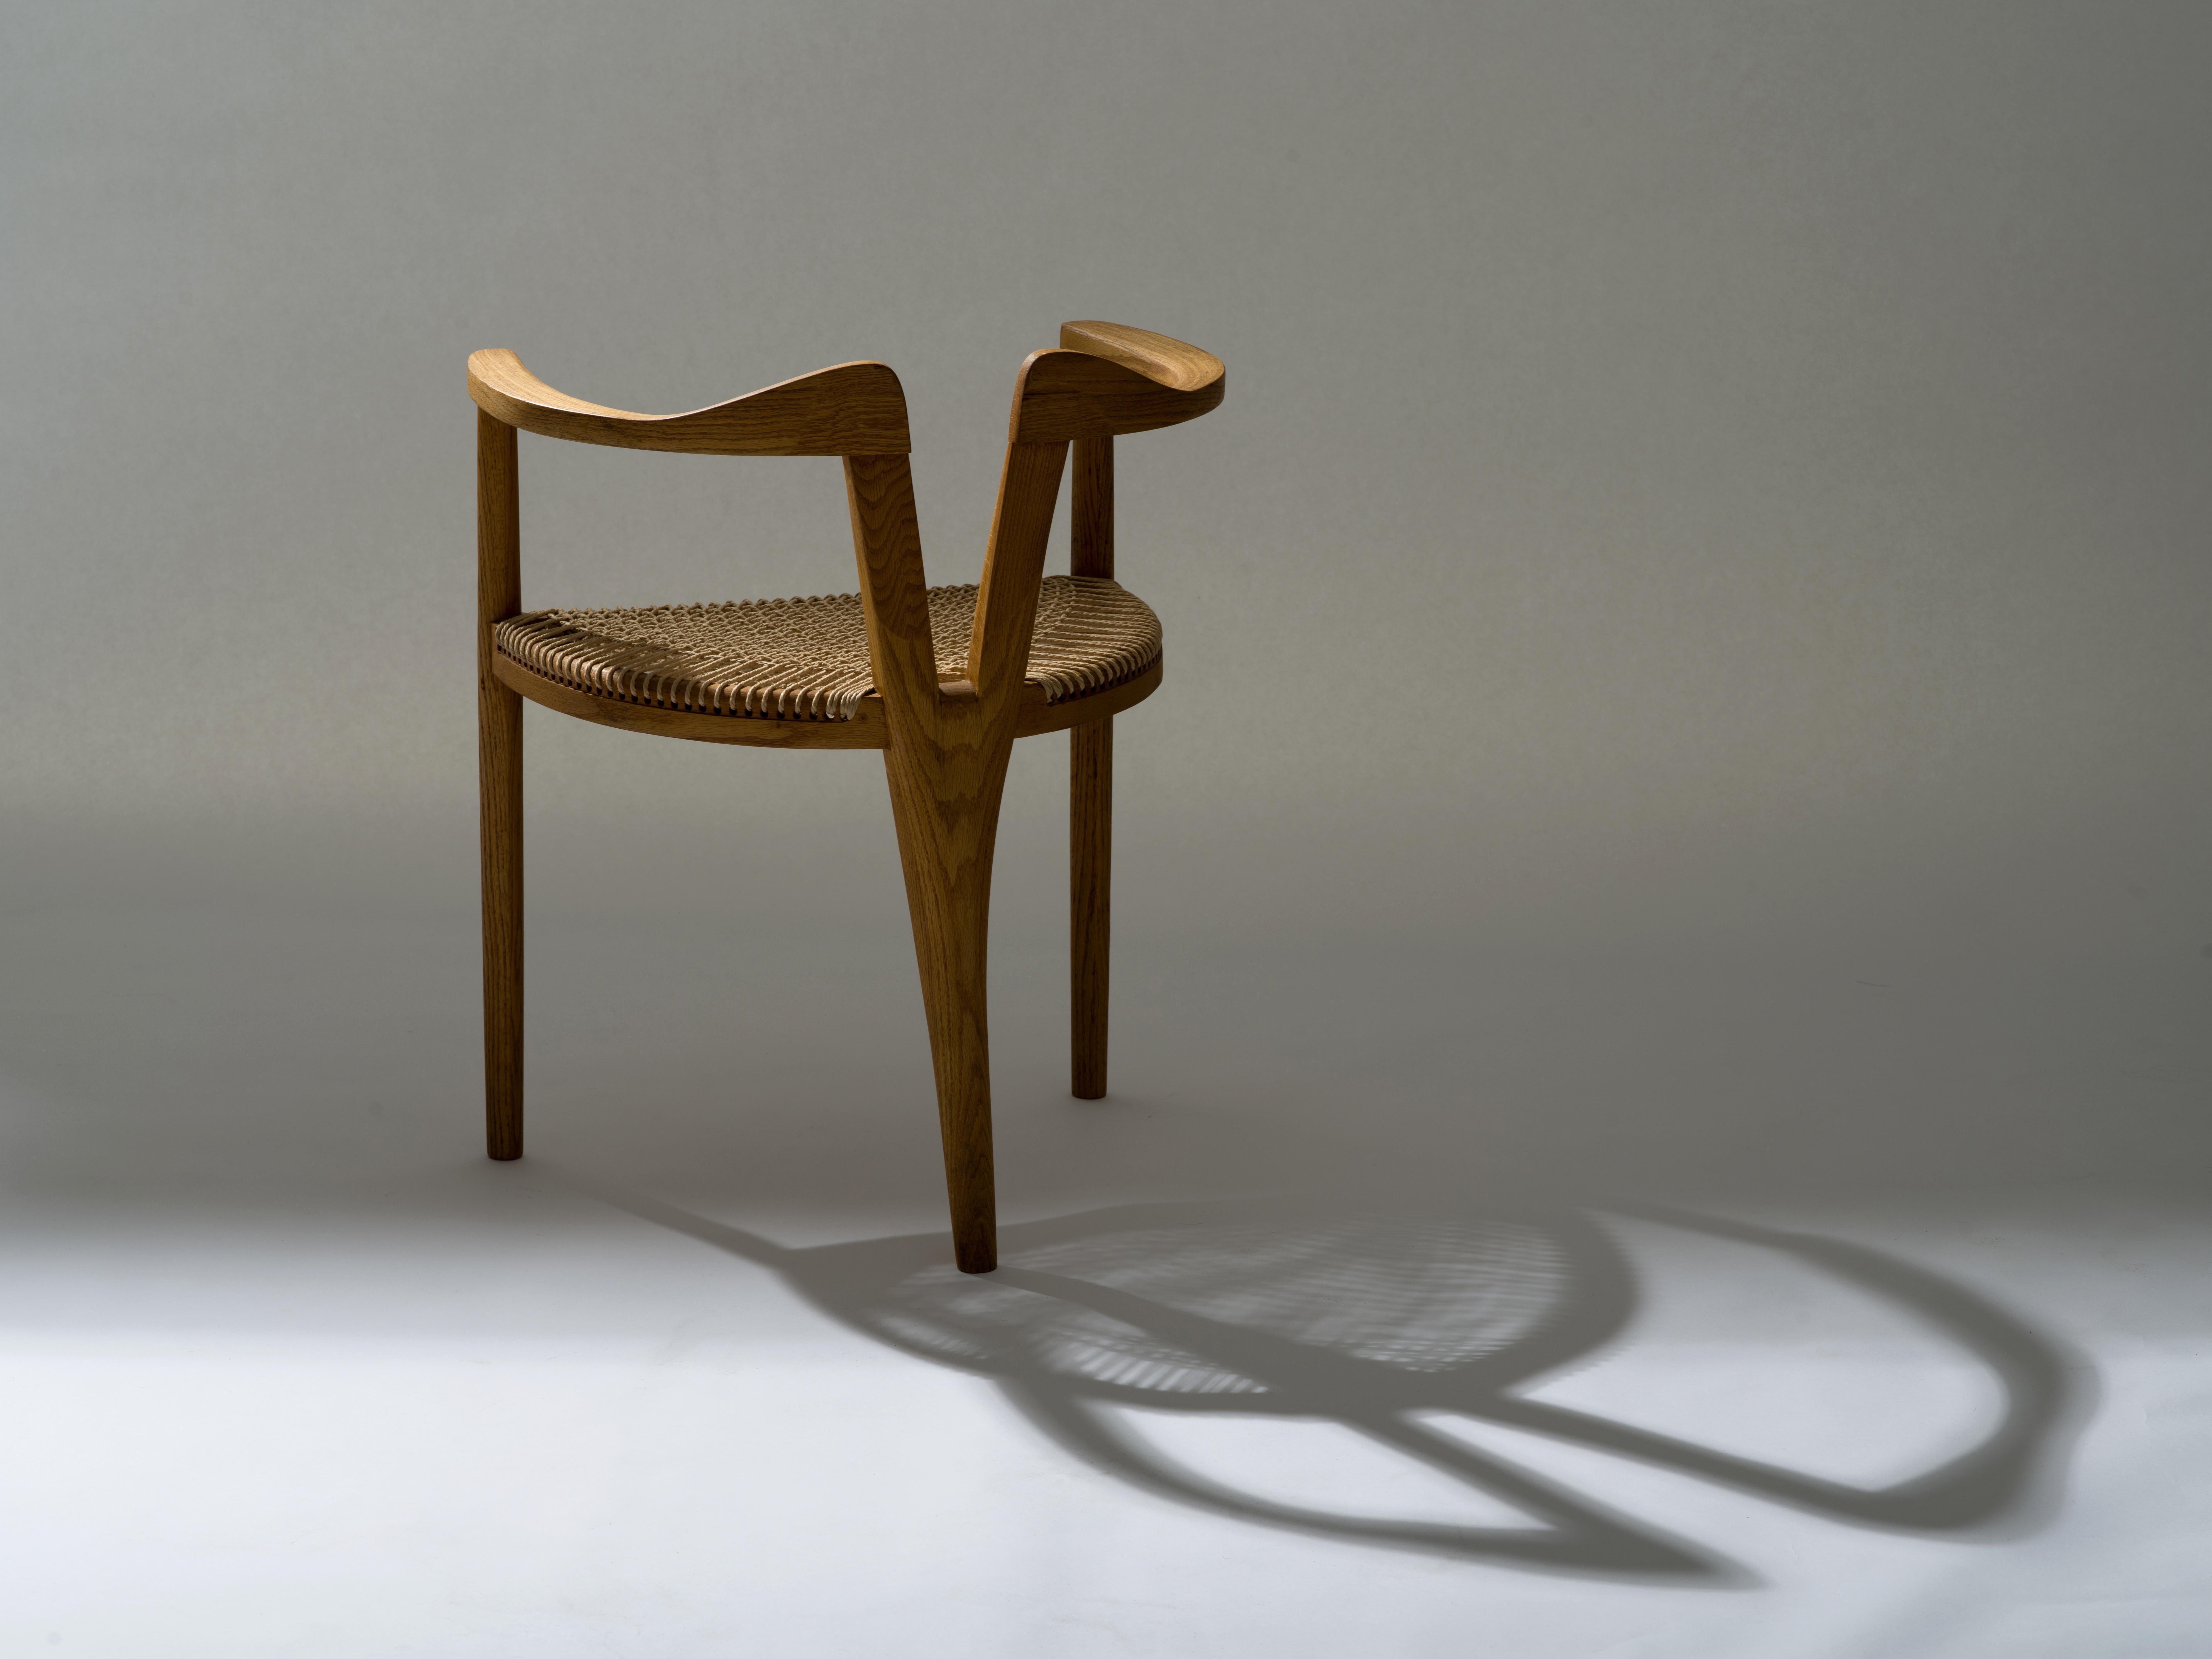 American Studio Craft Tri-Leg Chair in Oak with Woven Seat after Hans Wegner 8